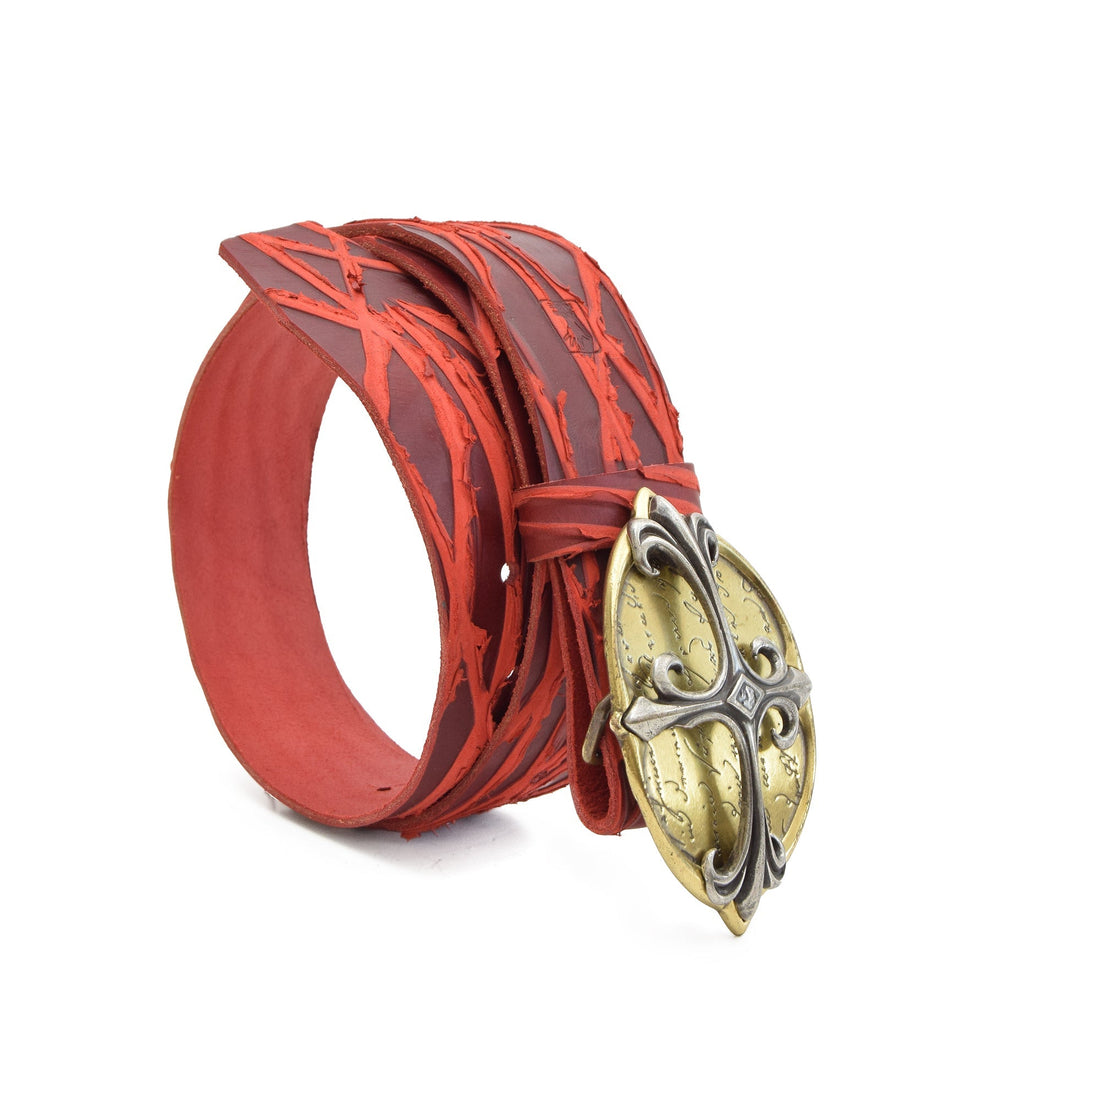 Aelithra Leather Belt Red with Changeable Buckle - 80 / Belts Zengoda Shop online from Artisan Brands